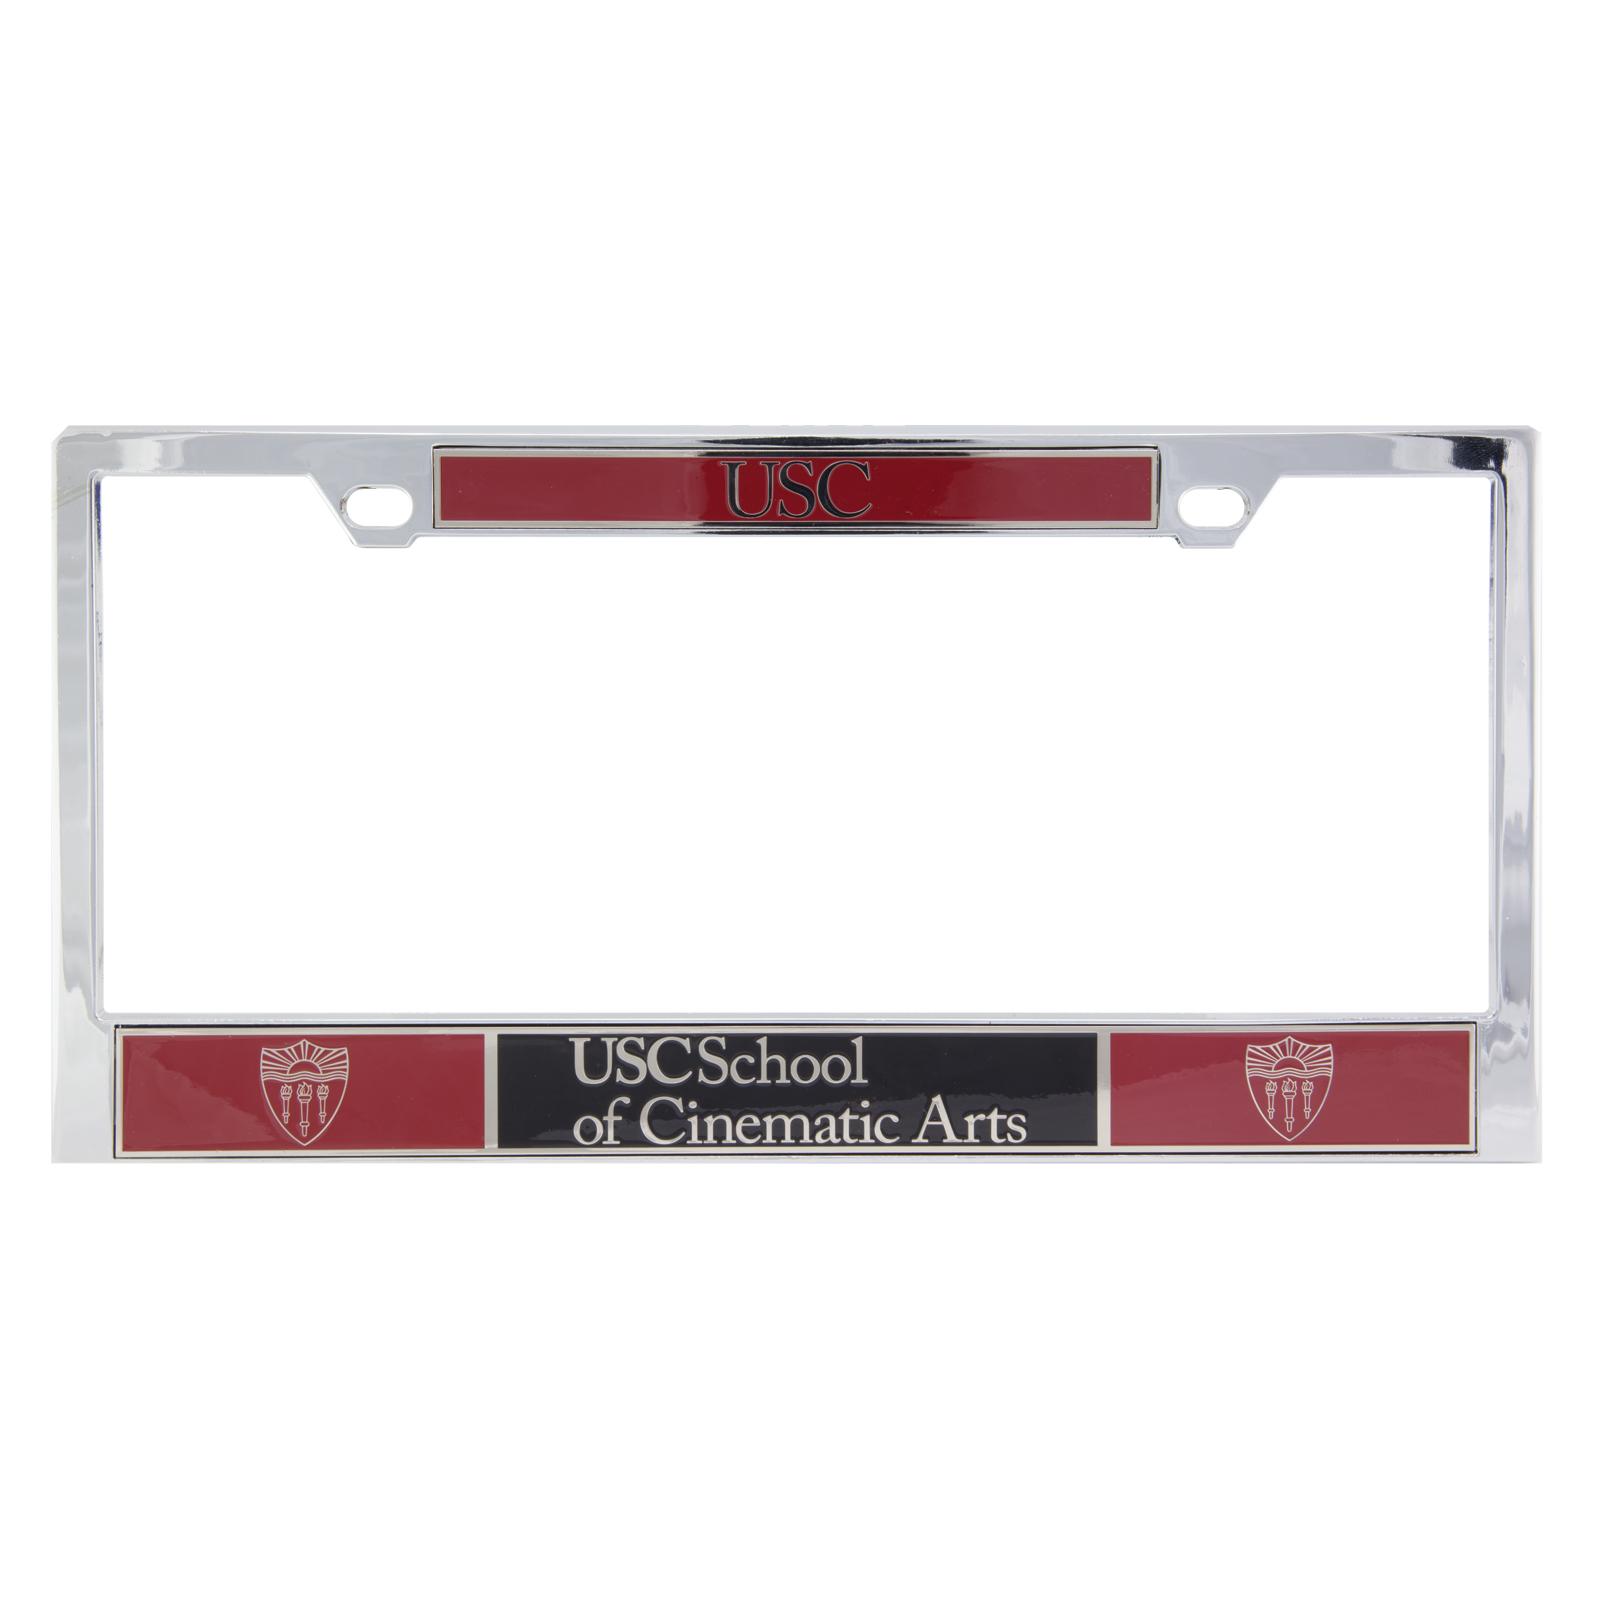 USC Shield Cinematic Arts License Plate Frame Chrome by The U Apparel & Gifts image01